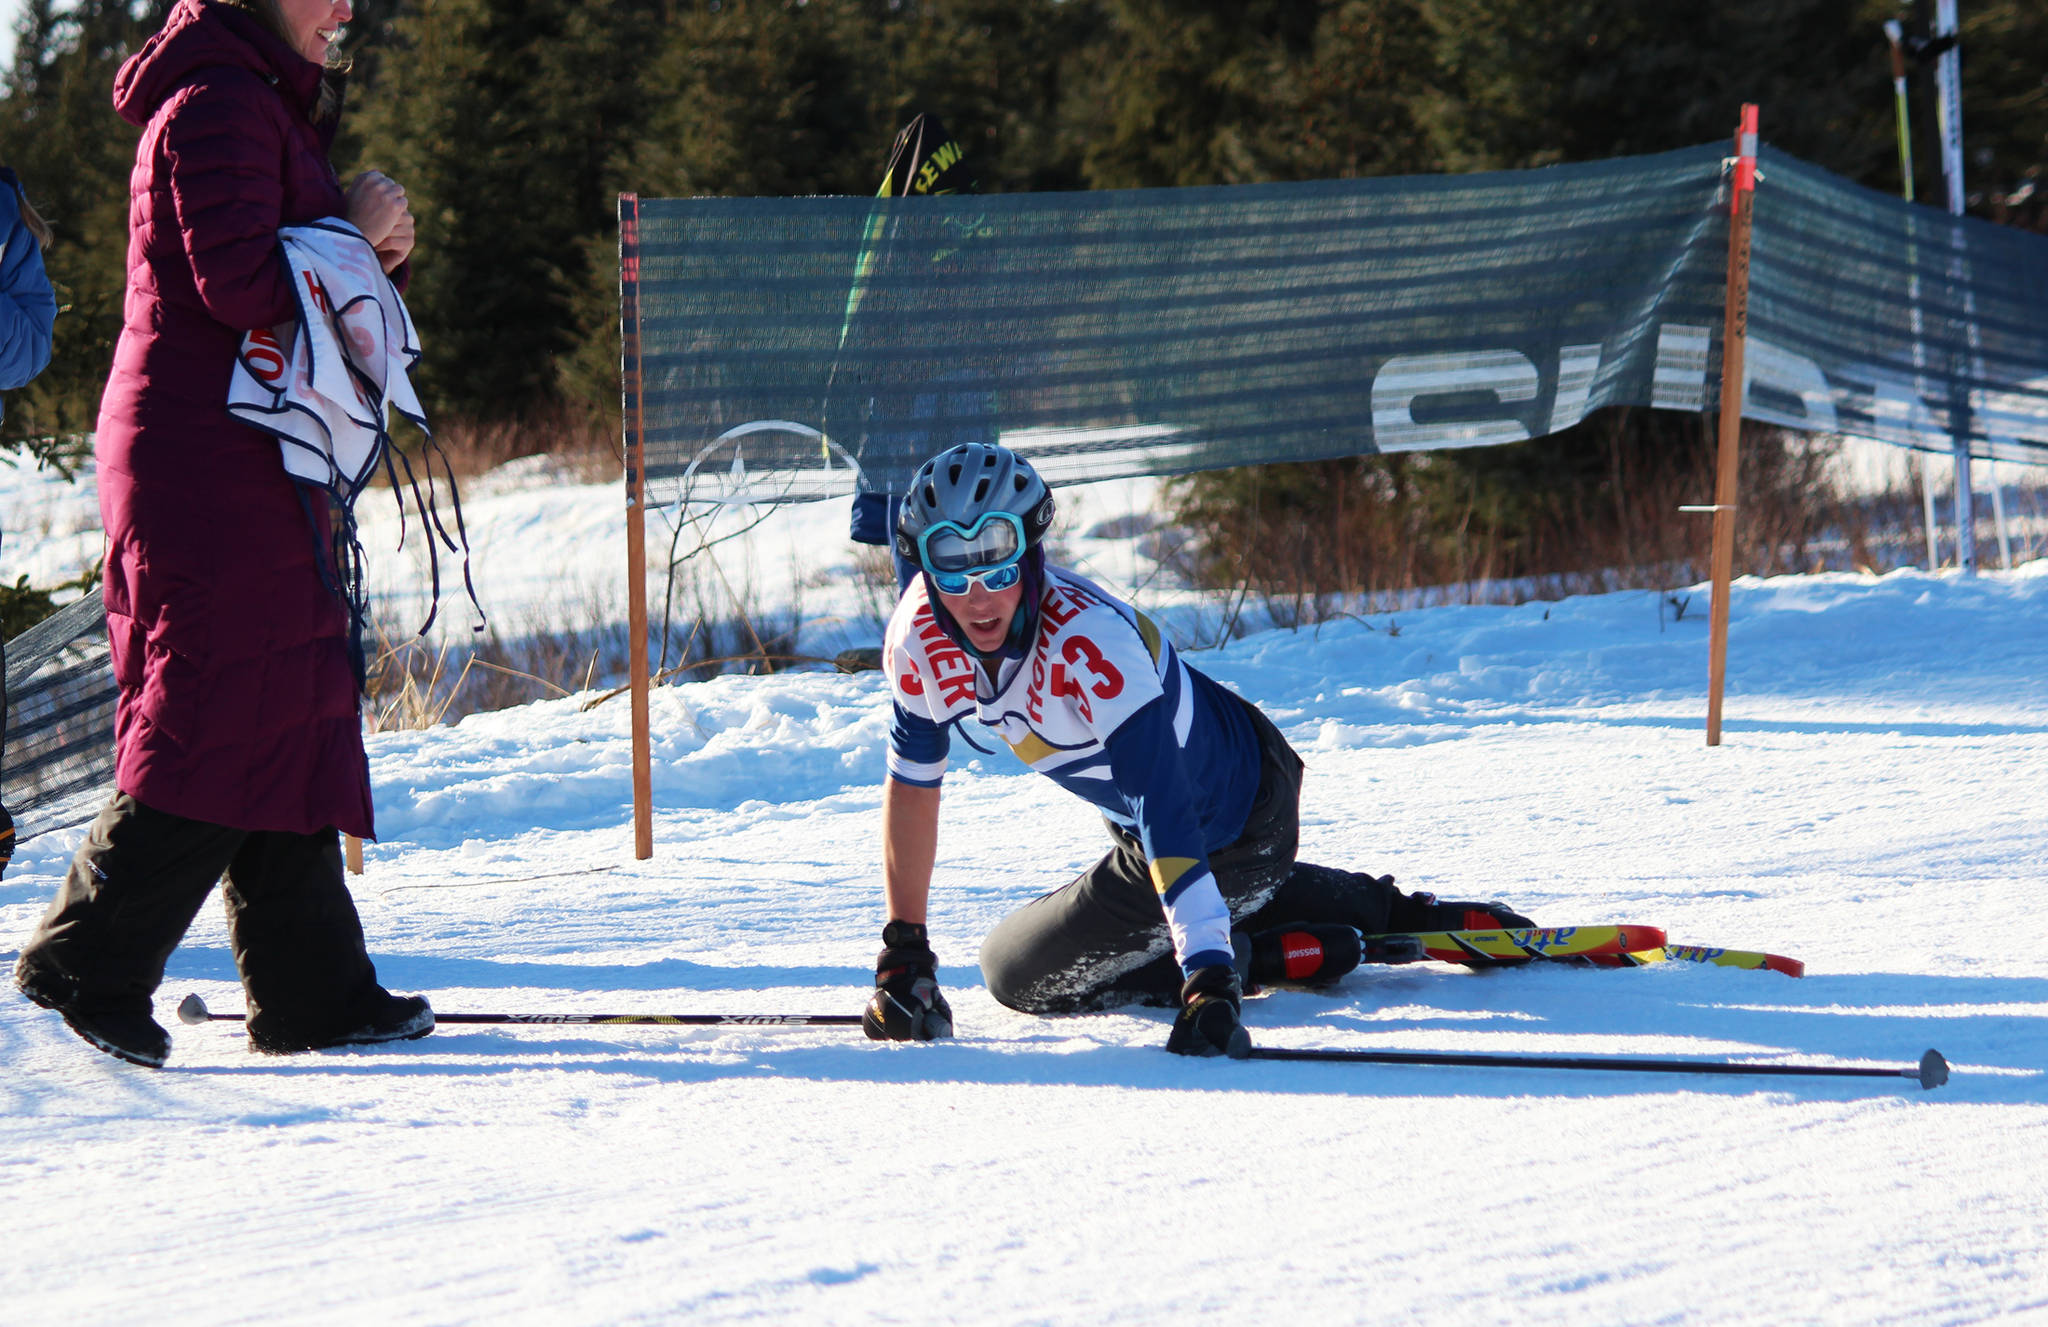 Homer’s Denver Waclawski stands back up after sliding to the ground when he crossed the finish line of the varsity boys’ 5 kilometer skate ski race Saturday, Feb. 3, 2018 at the Lookout Mountain Ski Trails near Homer, Alaska. Waclawski raced Soldotna’s Jode Sparks to a photo finish to claim sixth place. (Photo by Megan Pacer/Homer News)